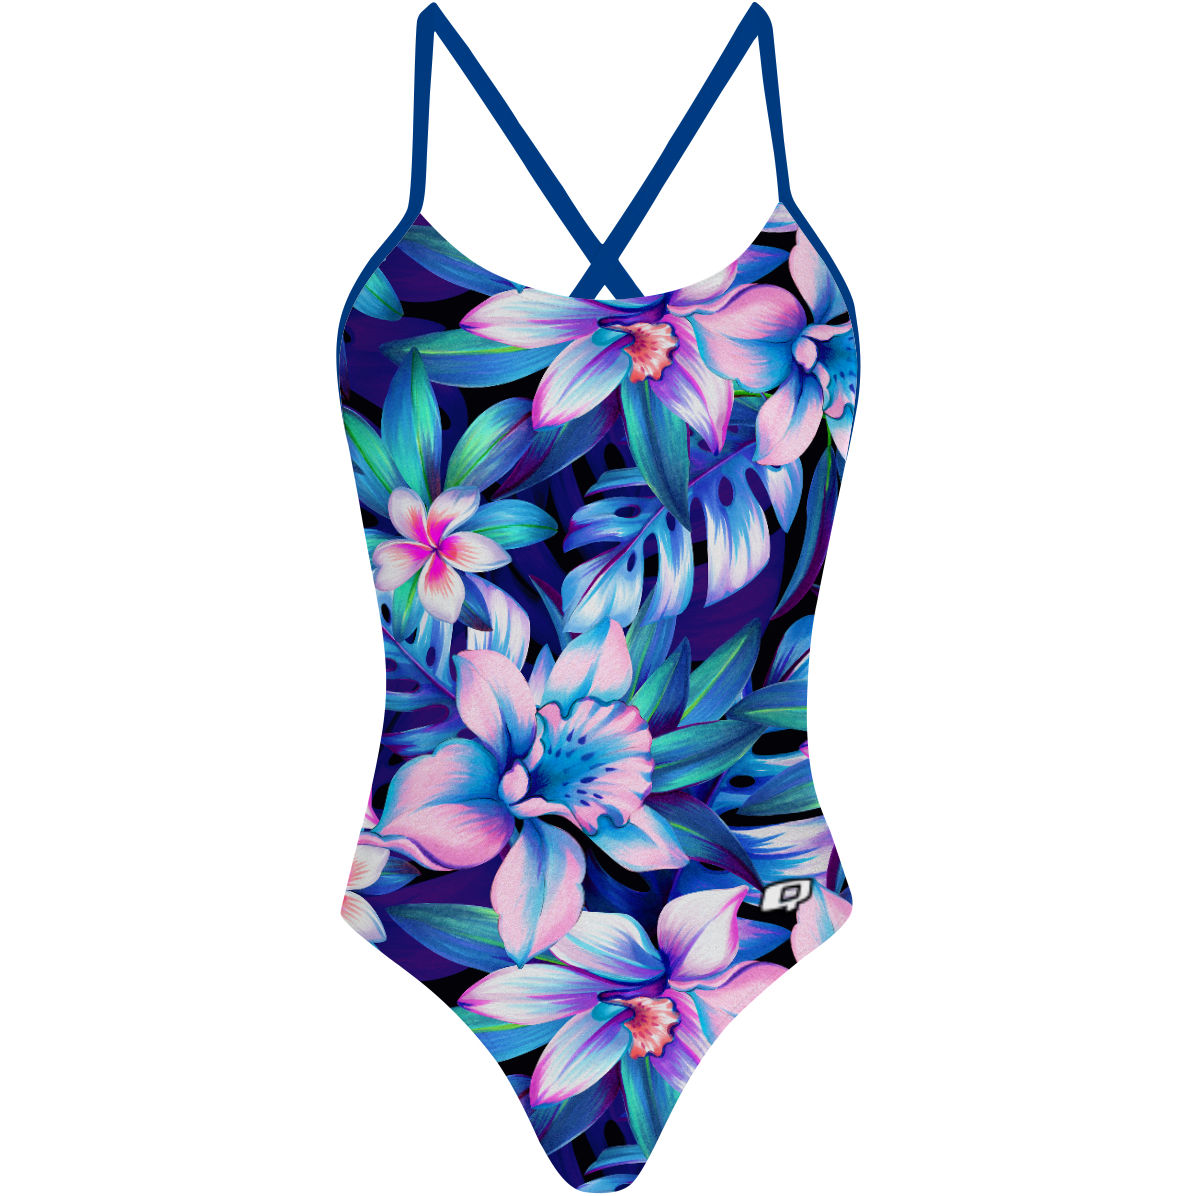 Outstanding Orchids - Tieback One Piece Swimsuit